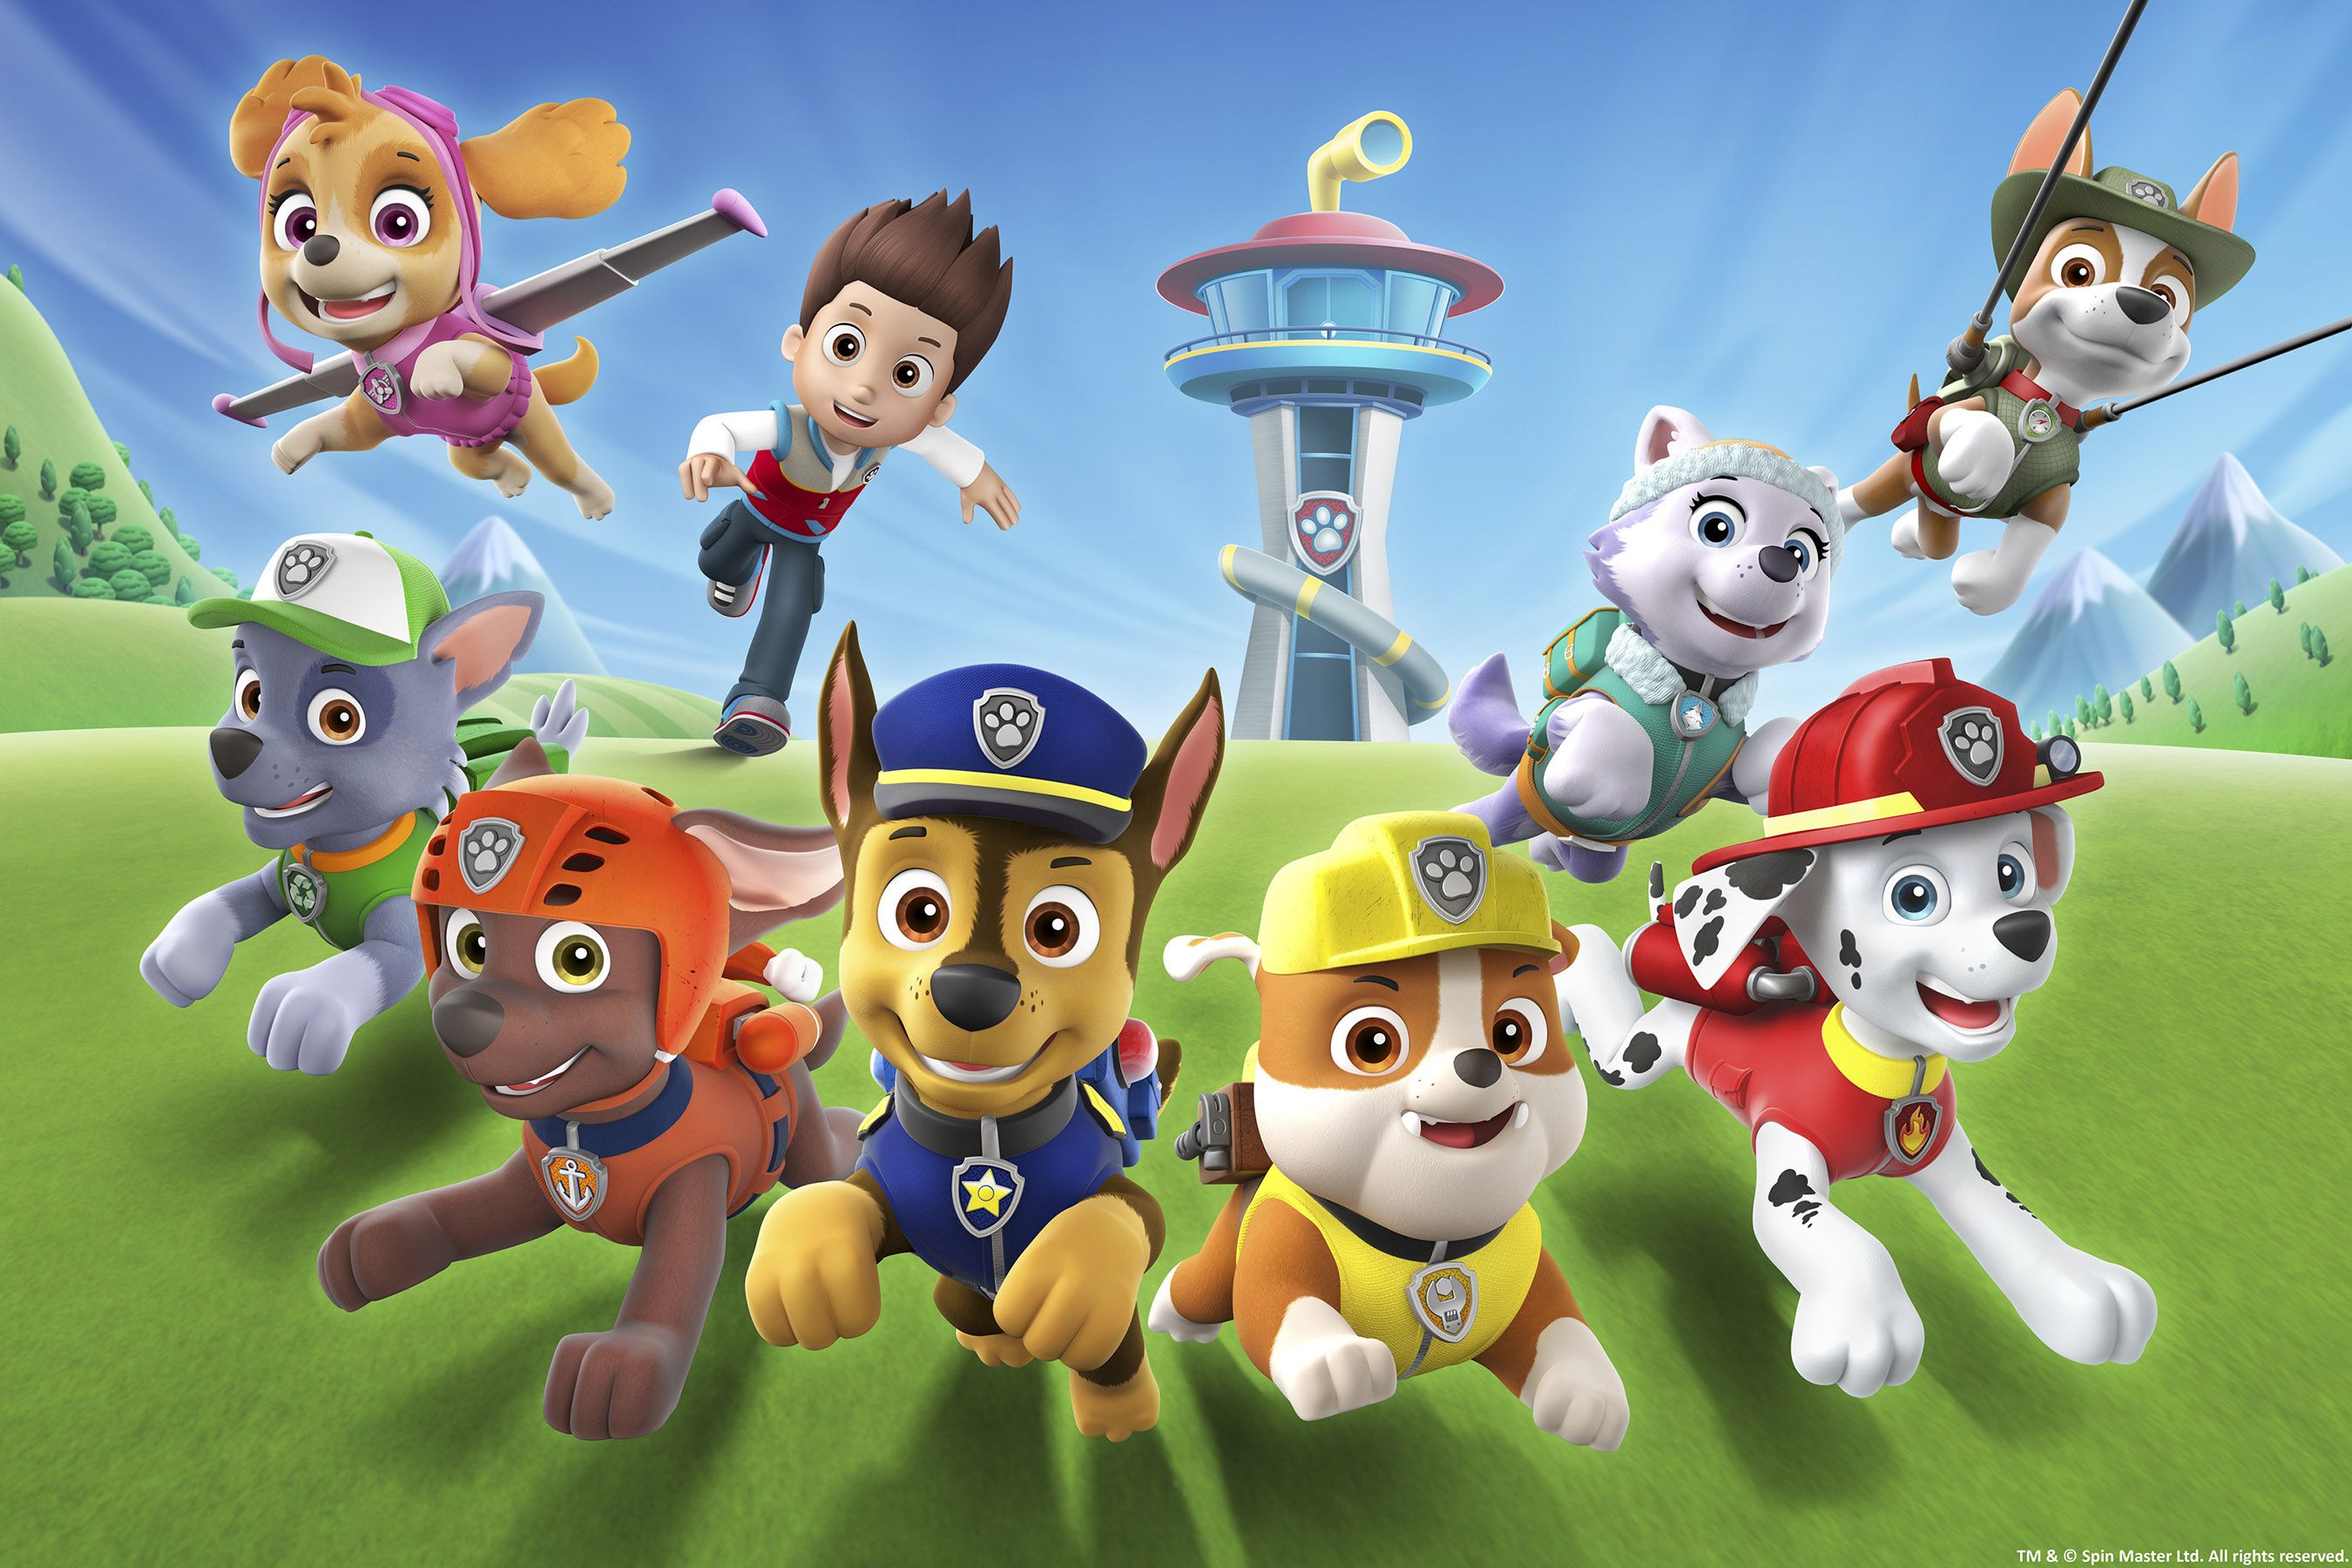 NickALive!: Nick Jr. UK Launches New 'PAW Patrol' Adventure Game